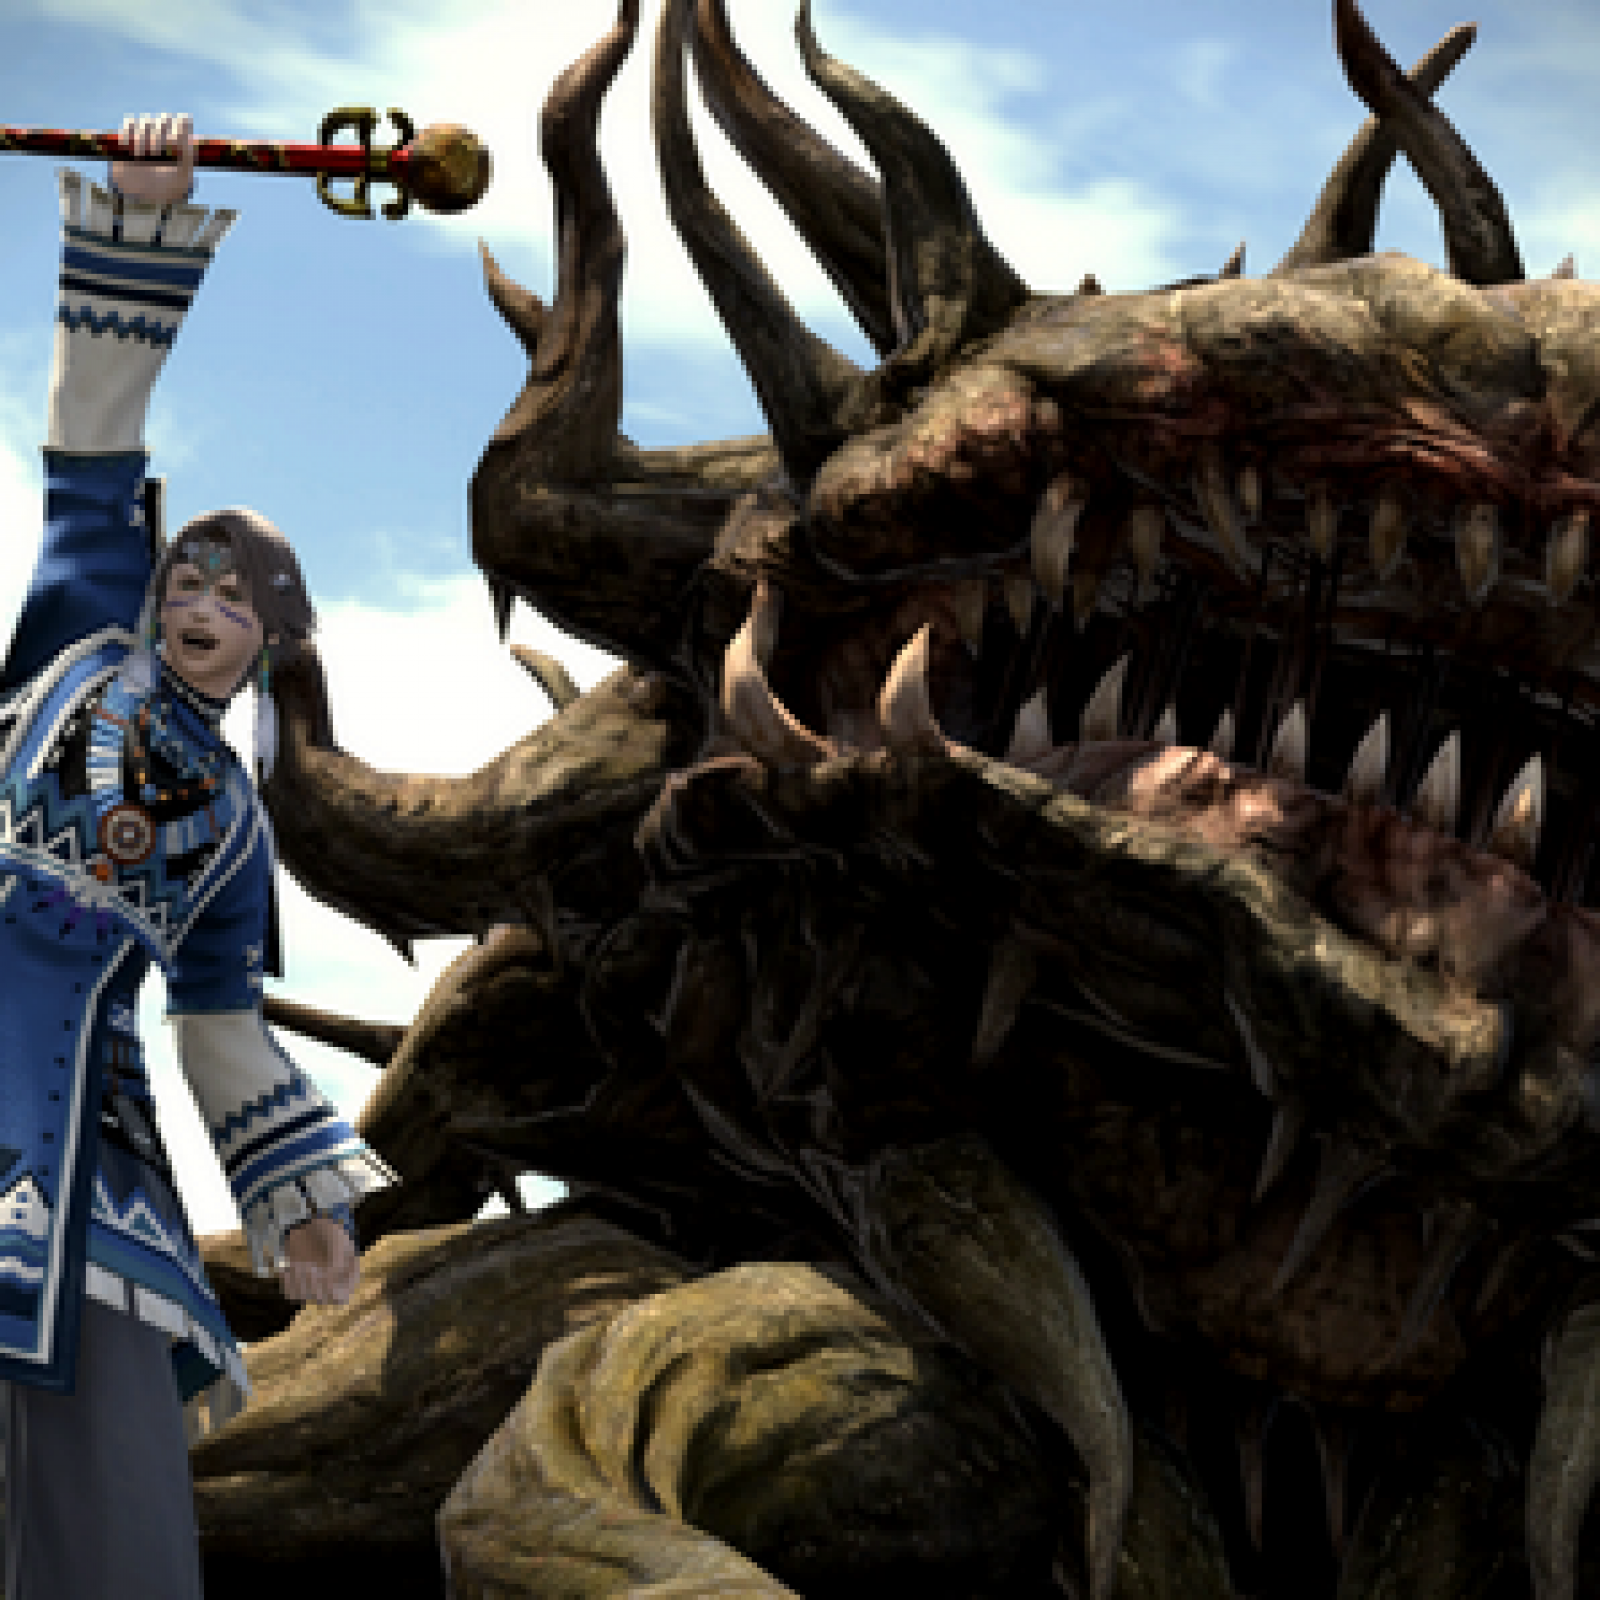 Final Fantasy Xiv 4 5 Patch Notes Update Brings New Blue